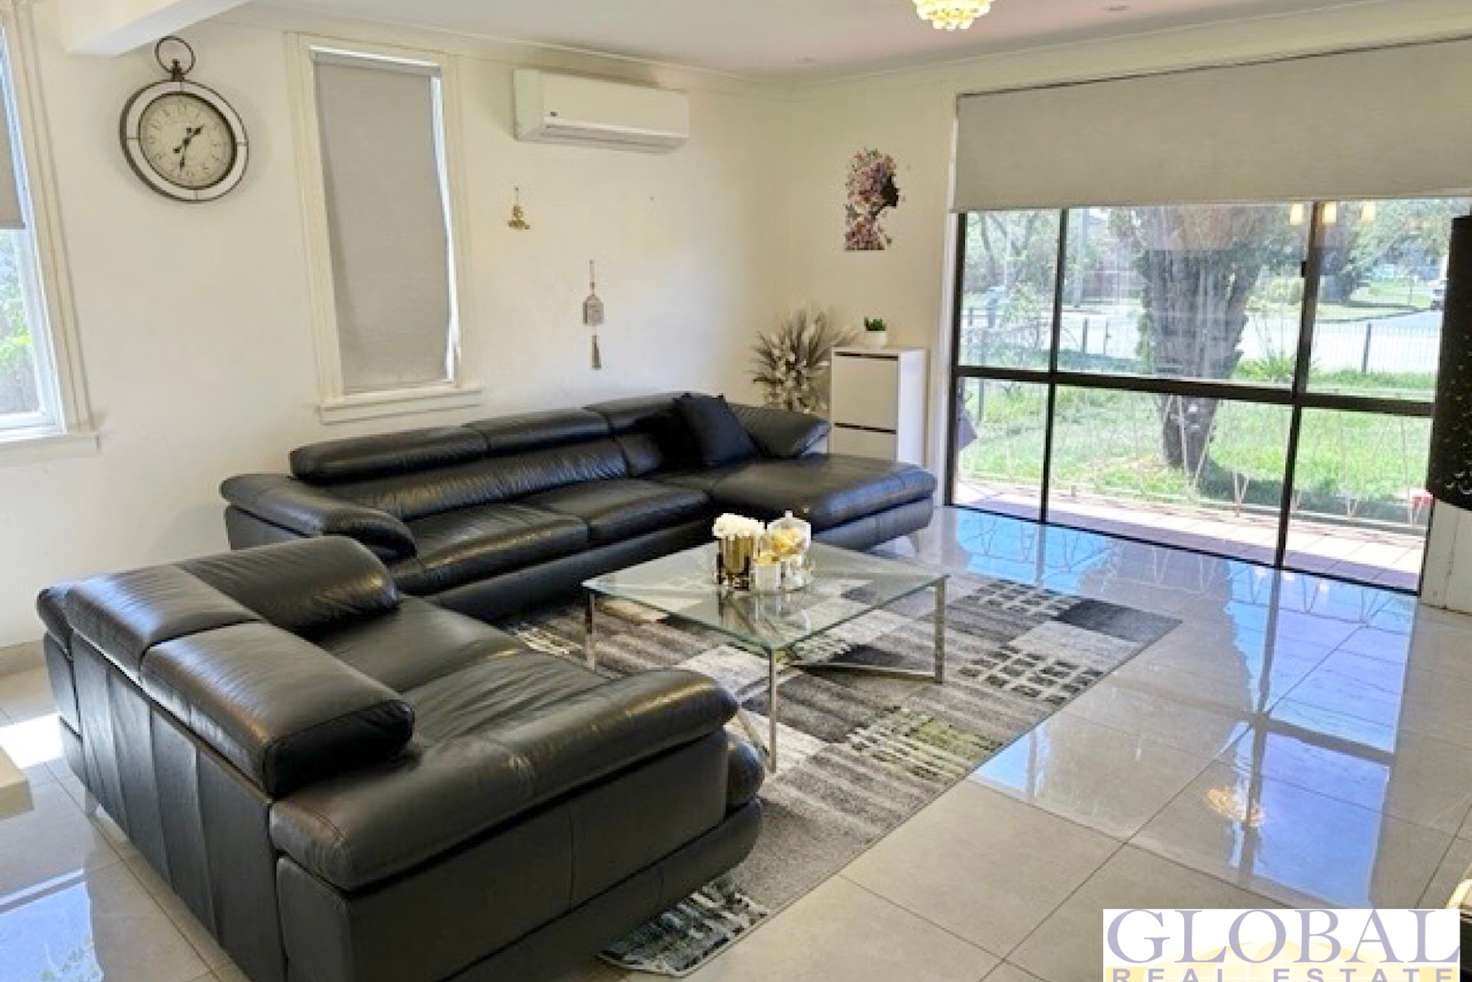 Main view of Homely house listing, 285 Luxford Rd, Tregear NSW 2770